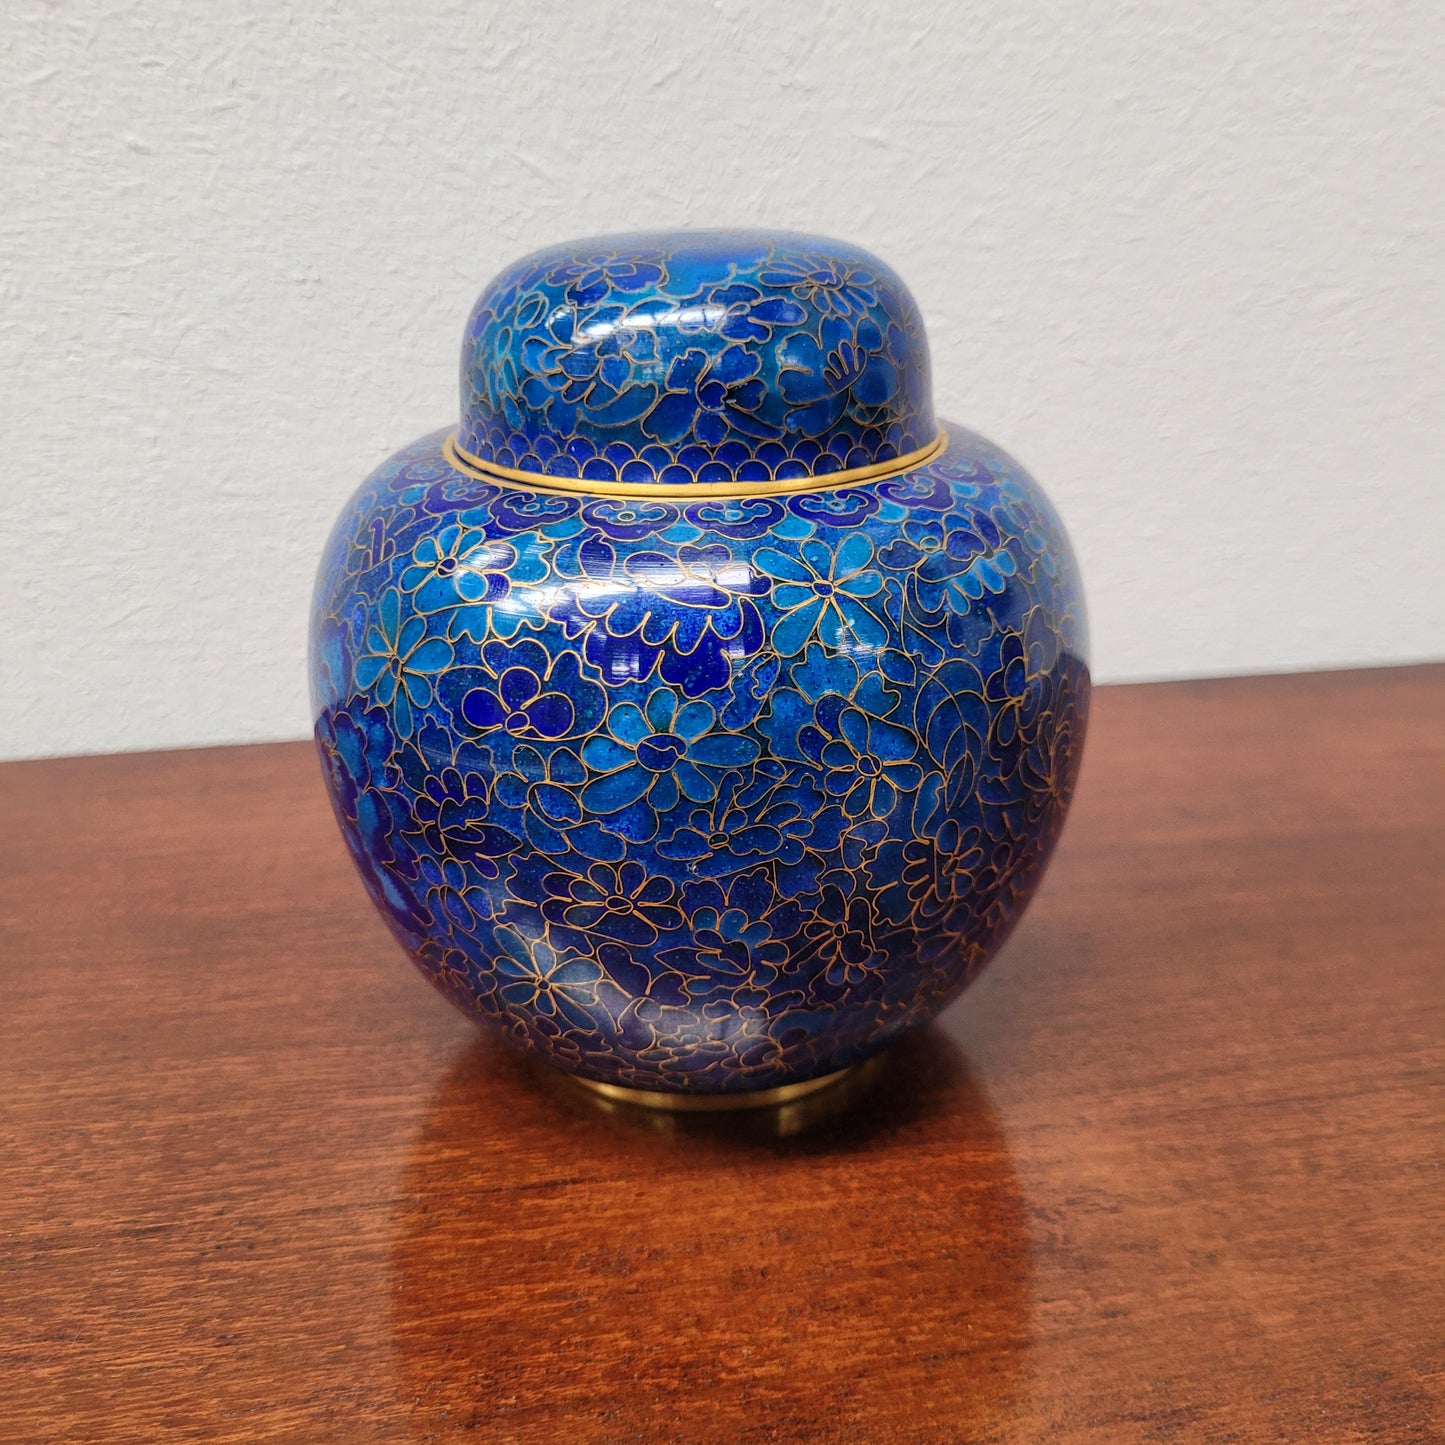 Delightful covered Ginger jar with cloisonné flowers in variants of blue. In very good condition.  Please see the photos as they form part of the description.